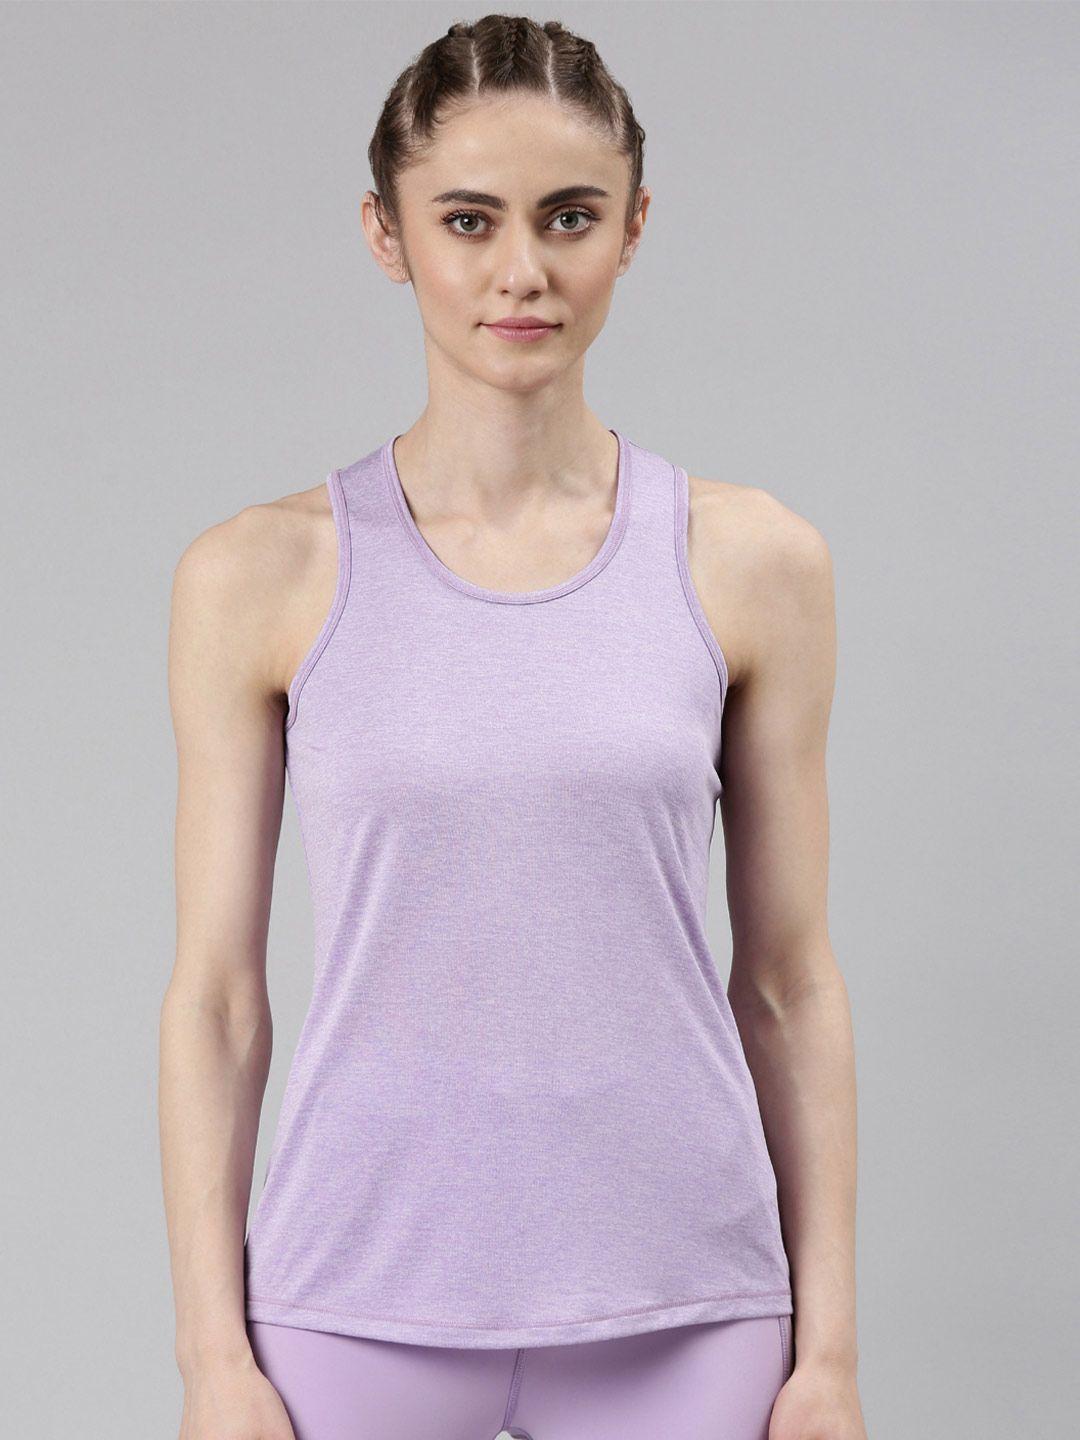 enamor-knitted-dry-fit-antimicrobial-tank-top